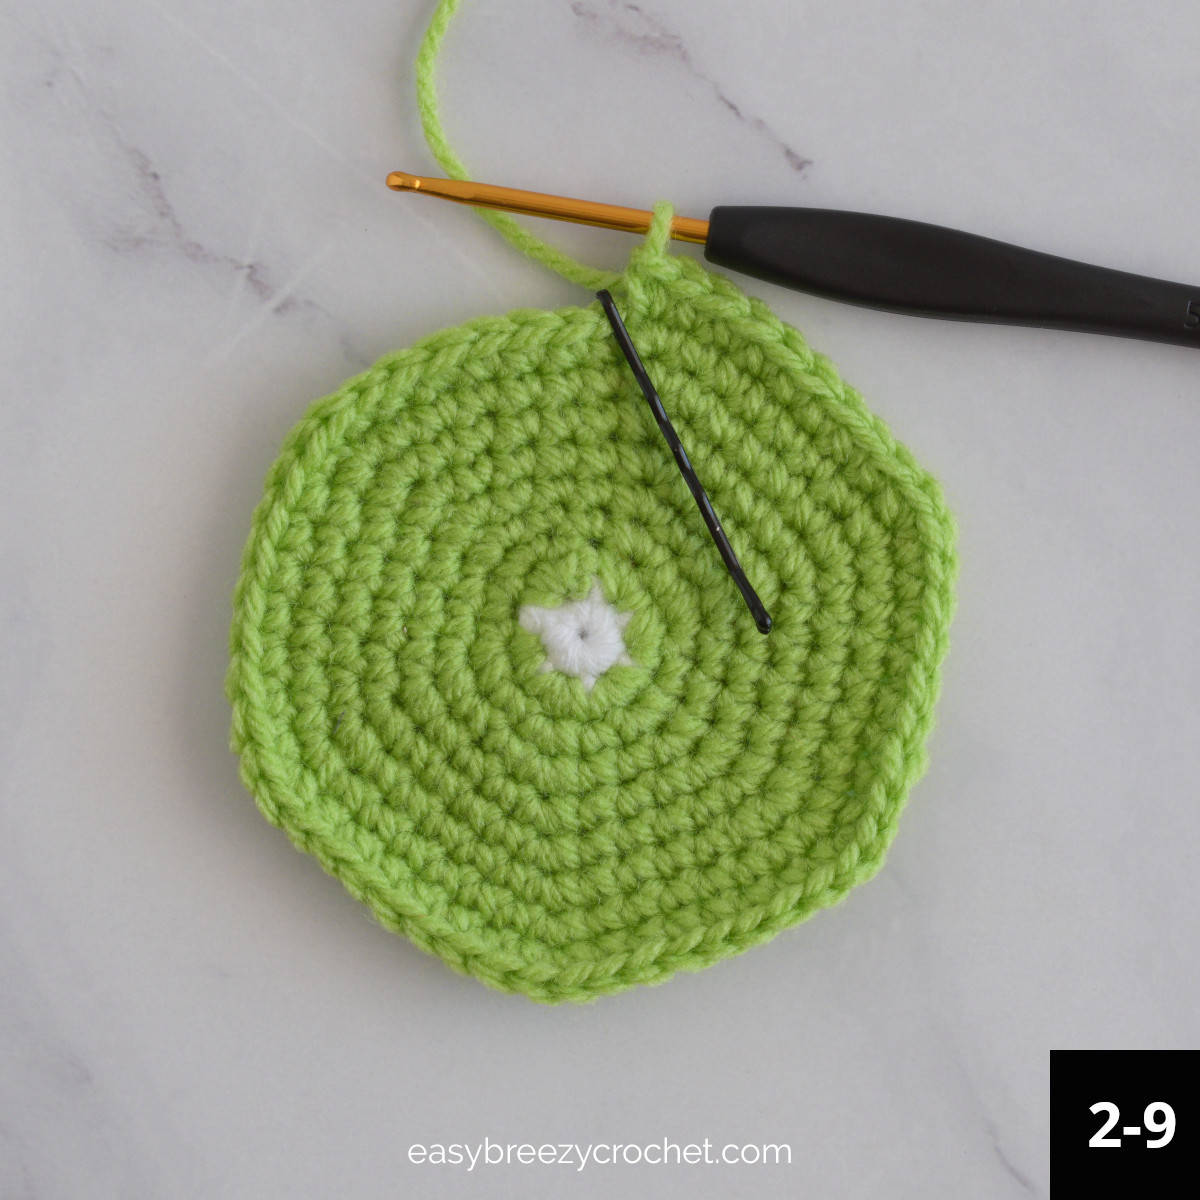 A green crochet circle with a small white centre.